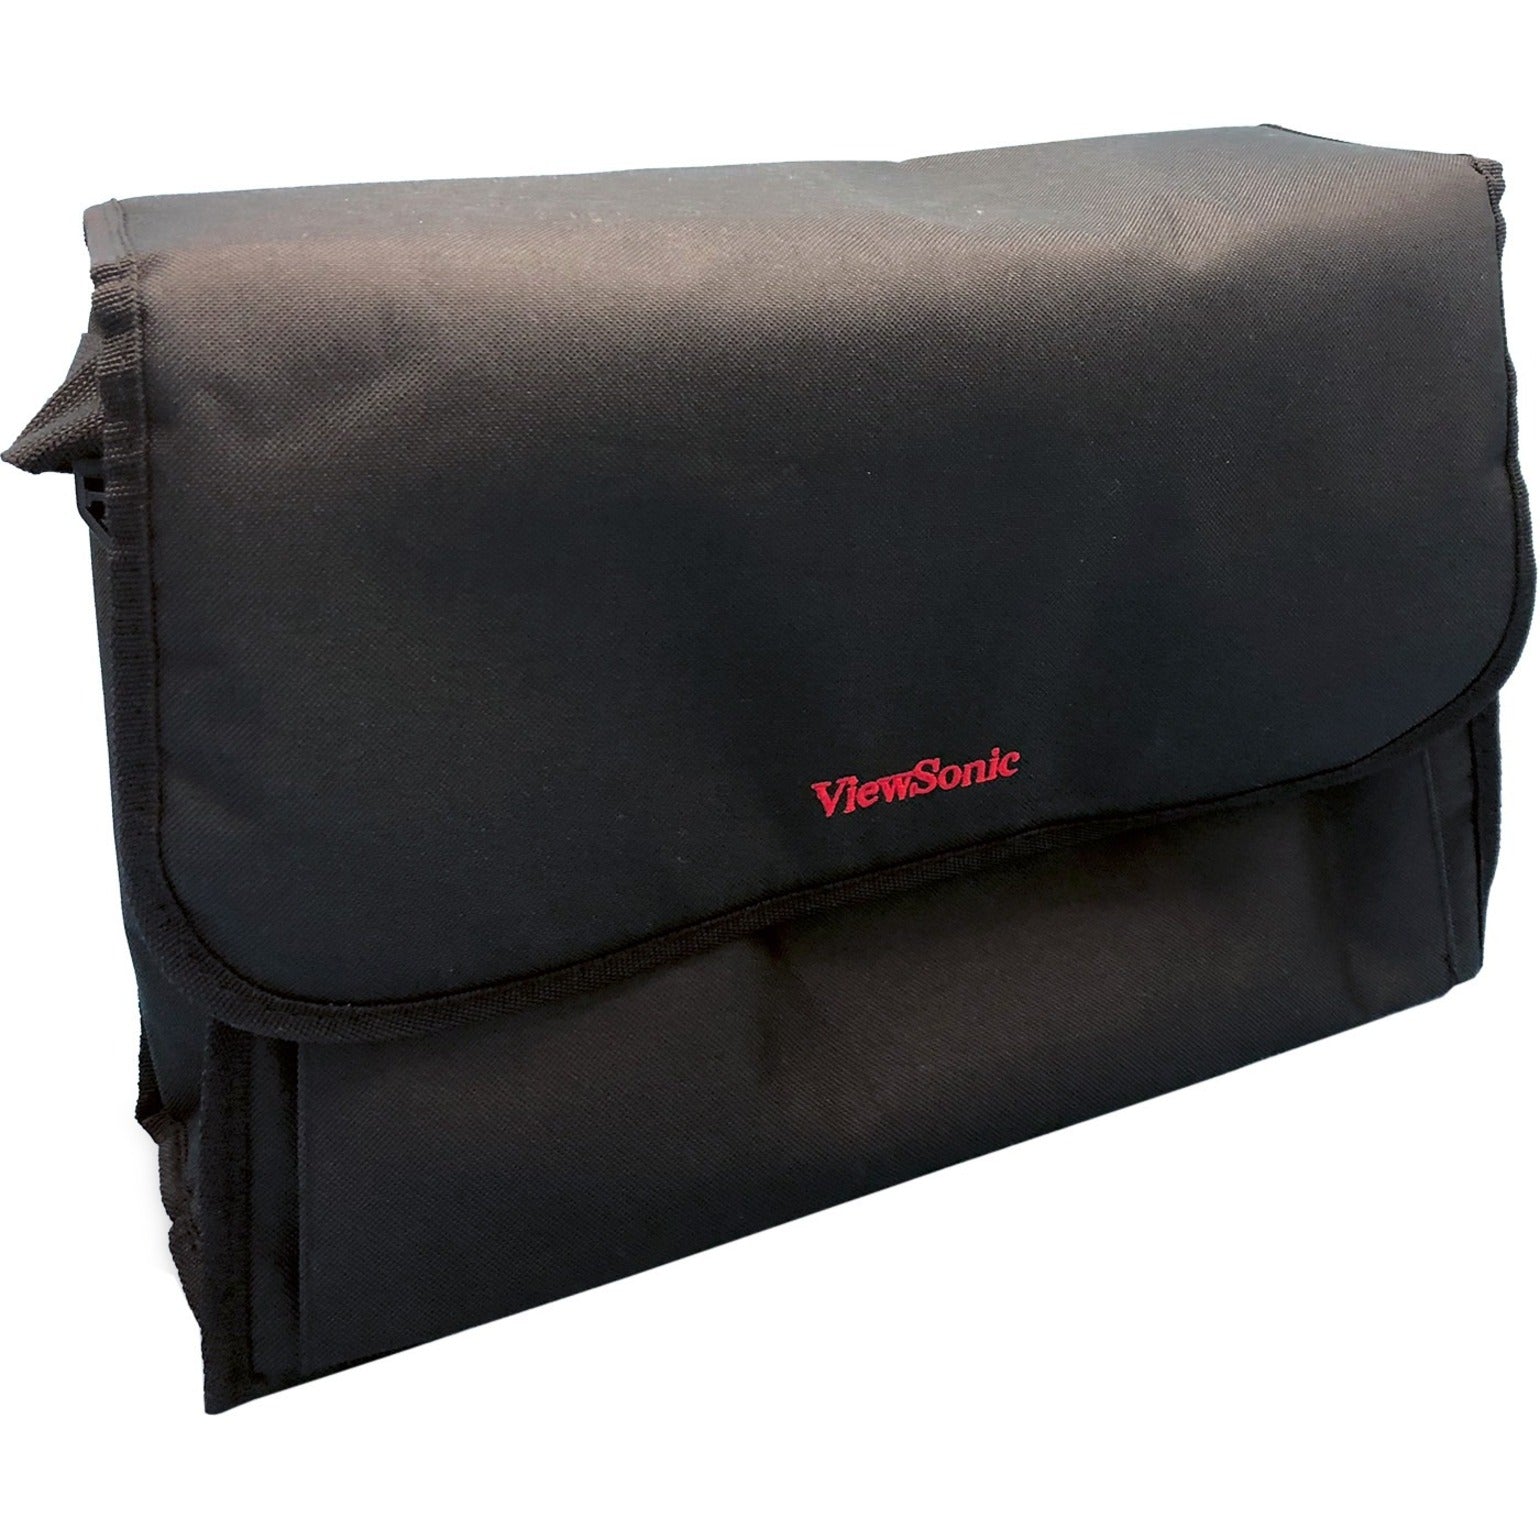 ViewSonic PJ-CASE-011 Projector Case, Soft Carrying Case for ViewSonic Projector